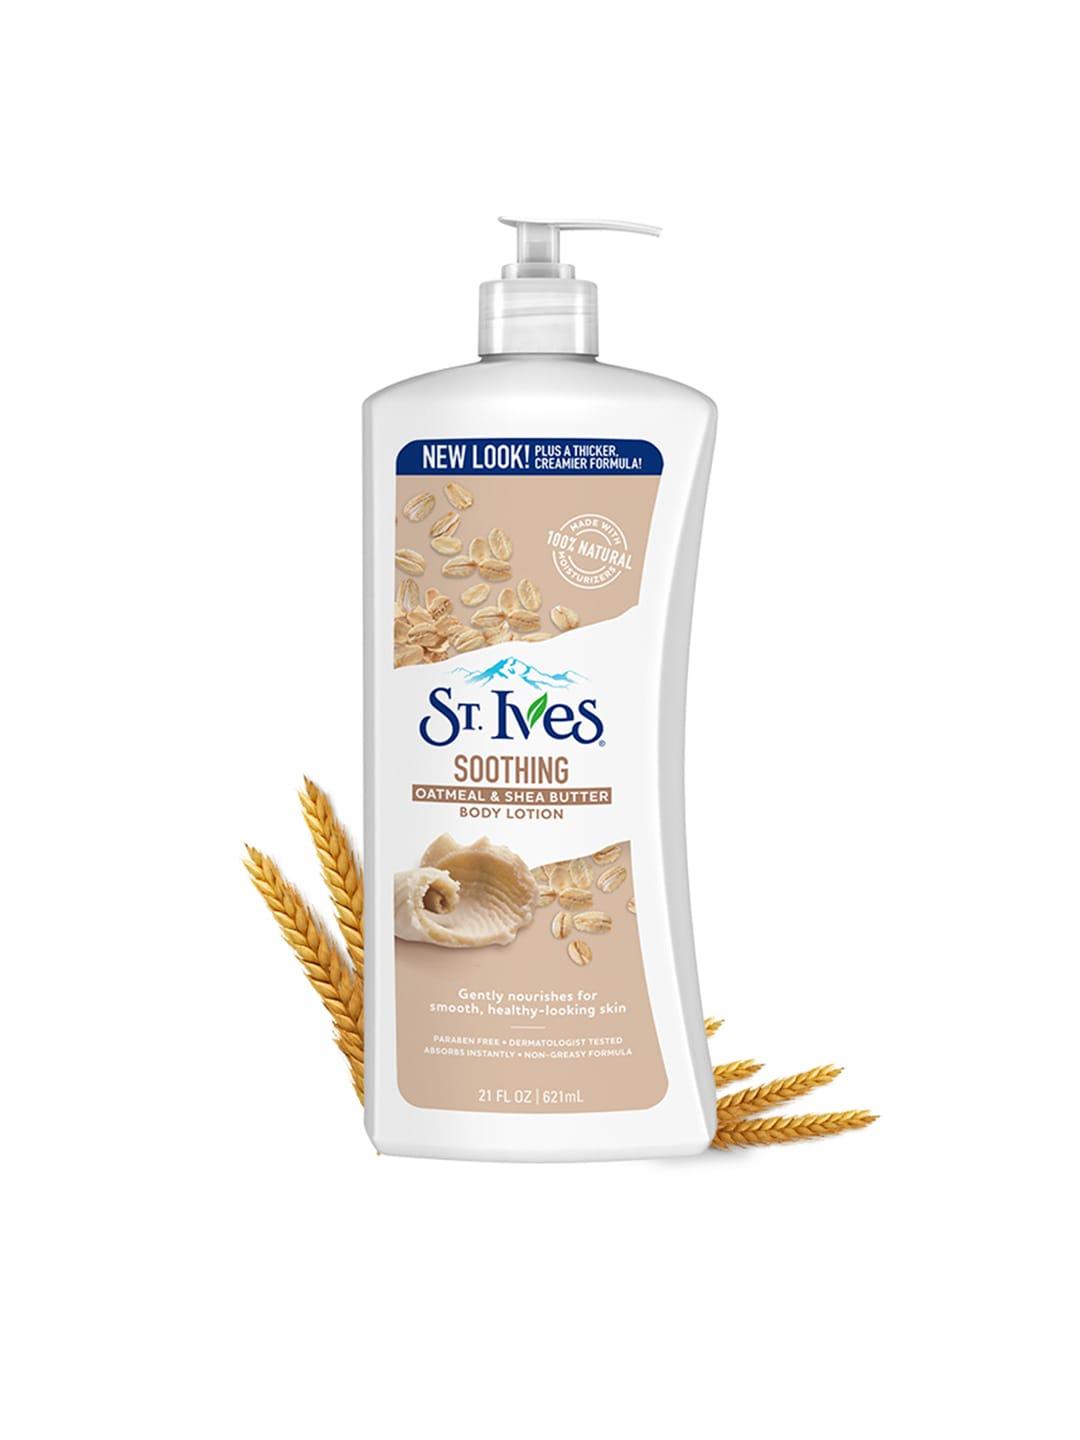 St. Ives Soothing Oatmeal & Shea Butter Body Lotion 621 ml